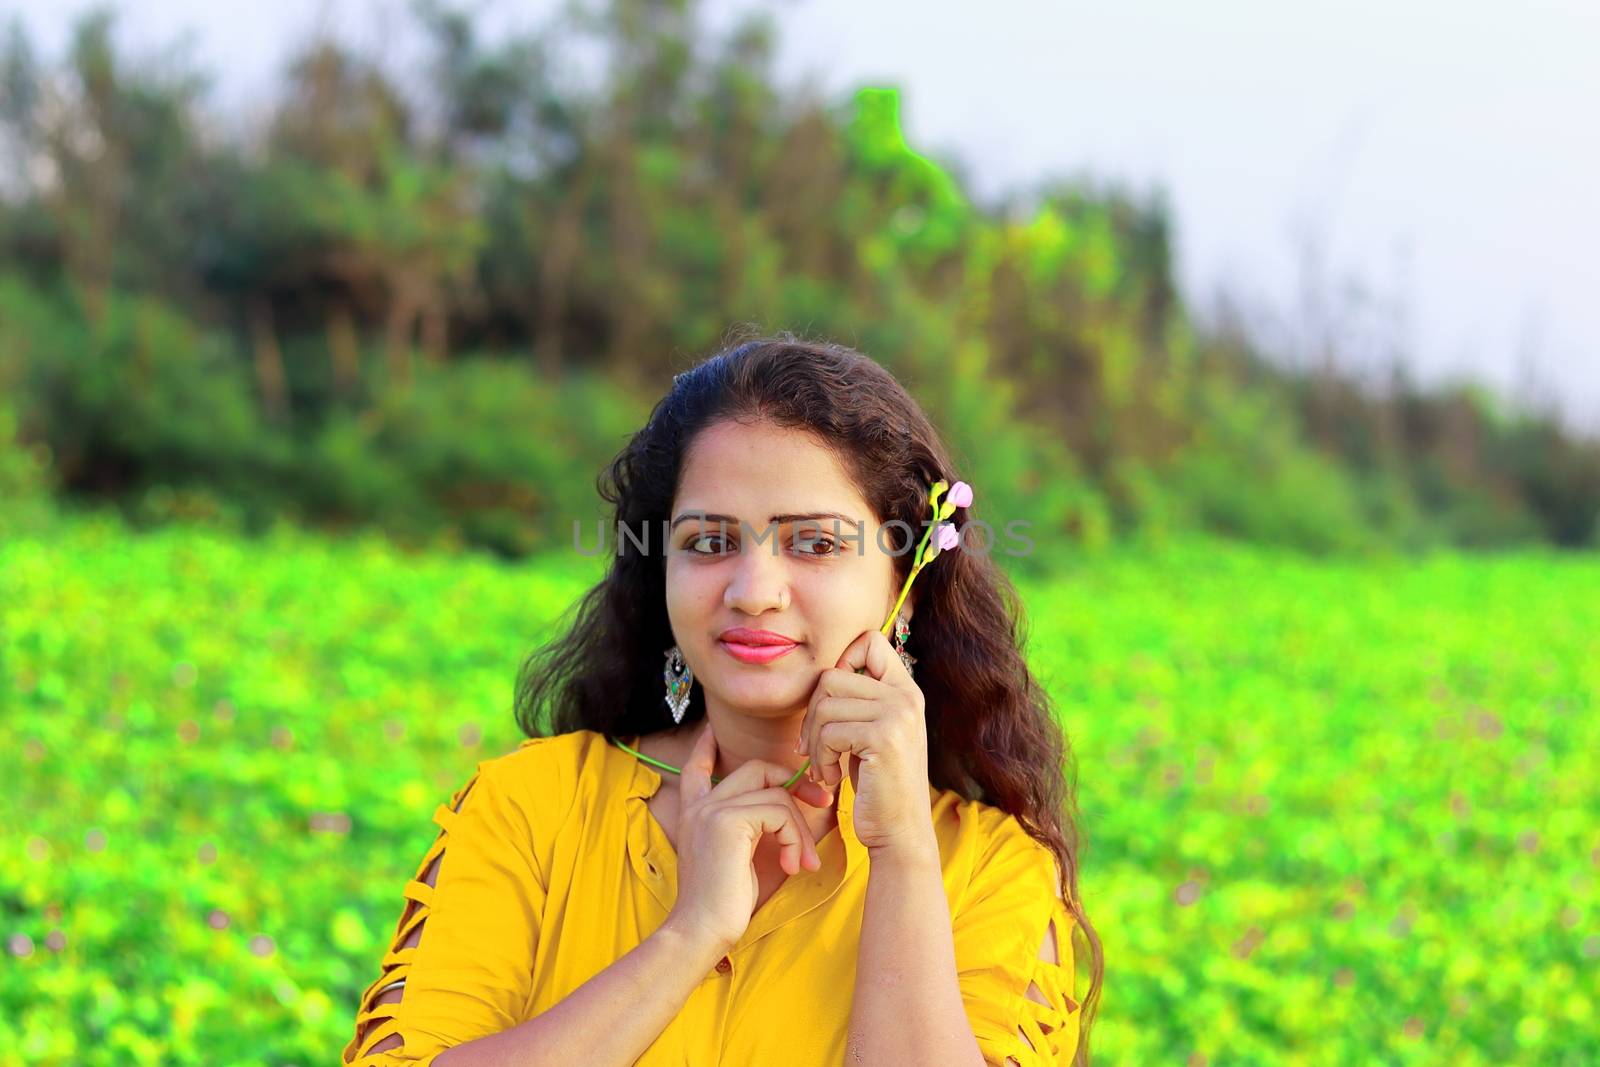 a stylish fair girl with blur green background,nature lover, by 9500102400